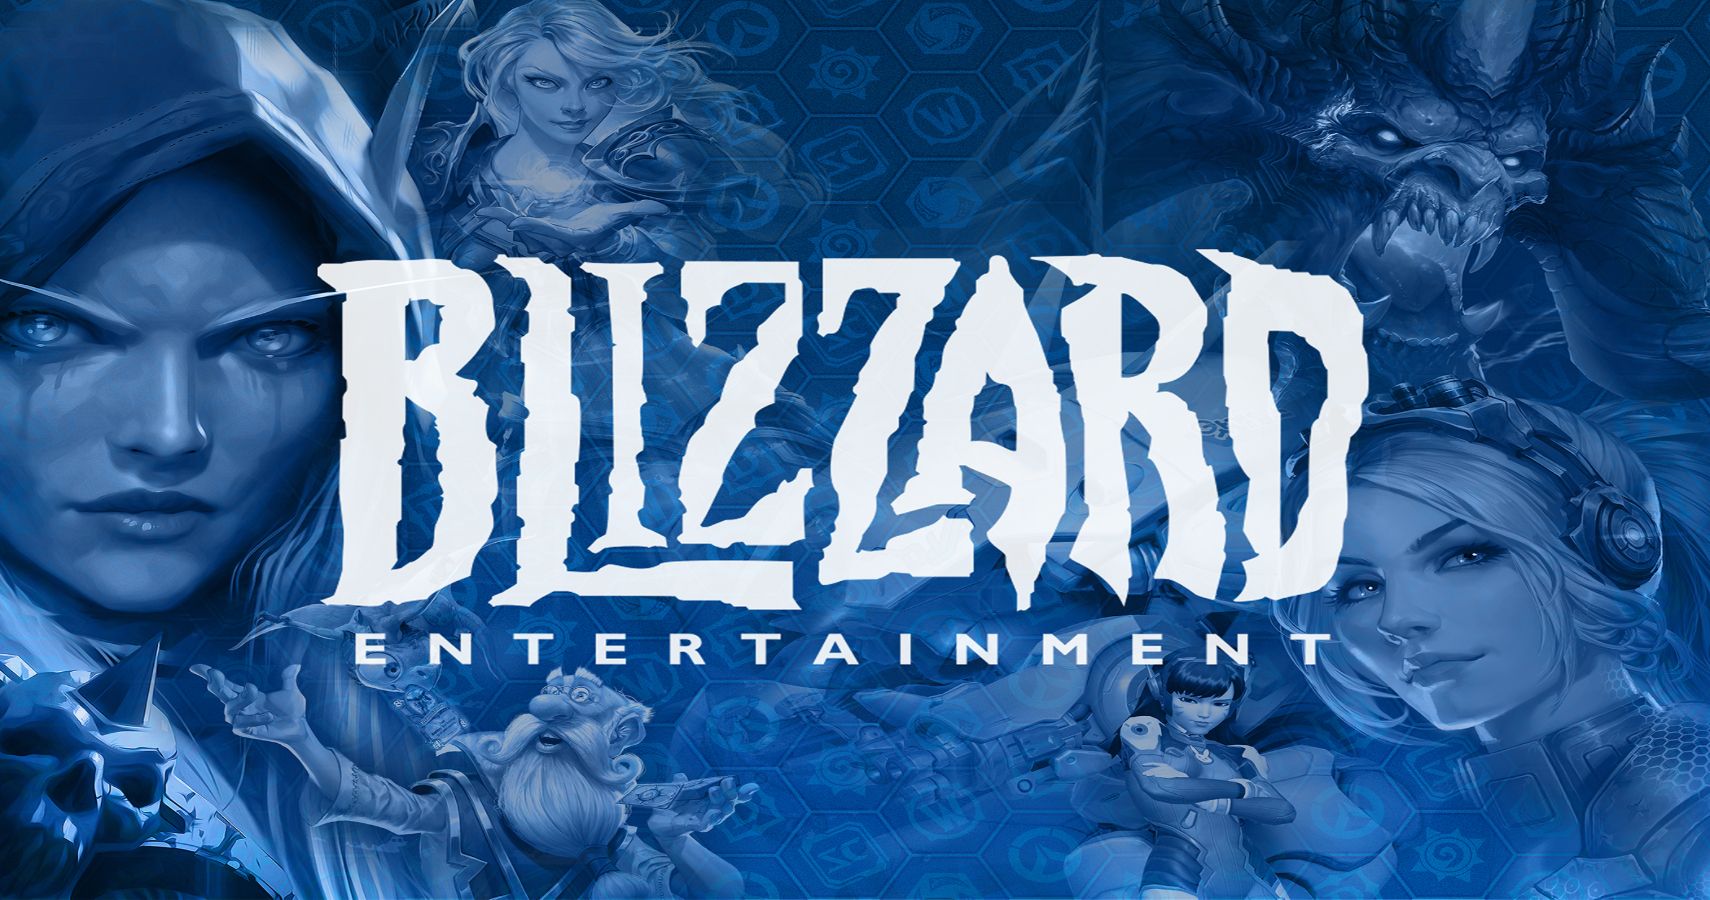 Blizzard Wants To Cut Work Hours For World Of Warcraft Team But ‘We’re Not There 100% Yet’